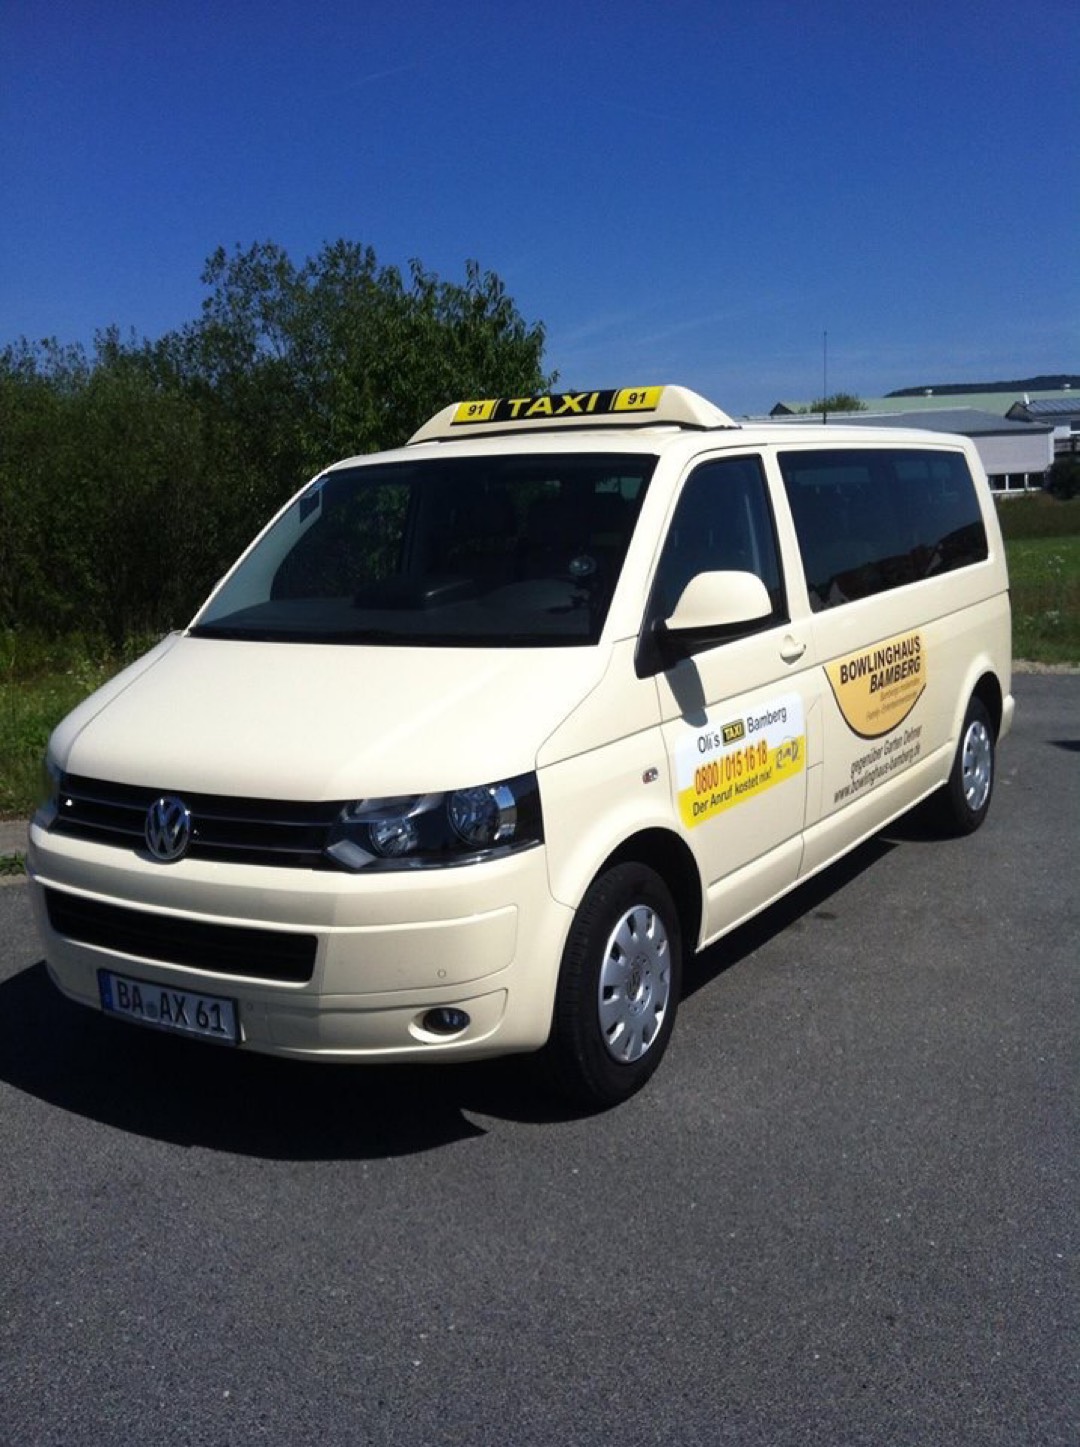 Bild 2 Airport Taxi in Bamberg